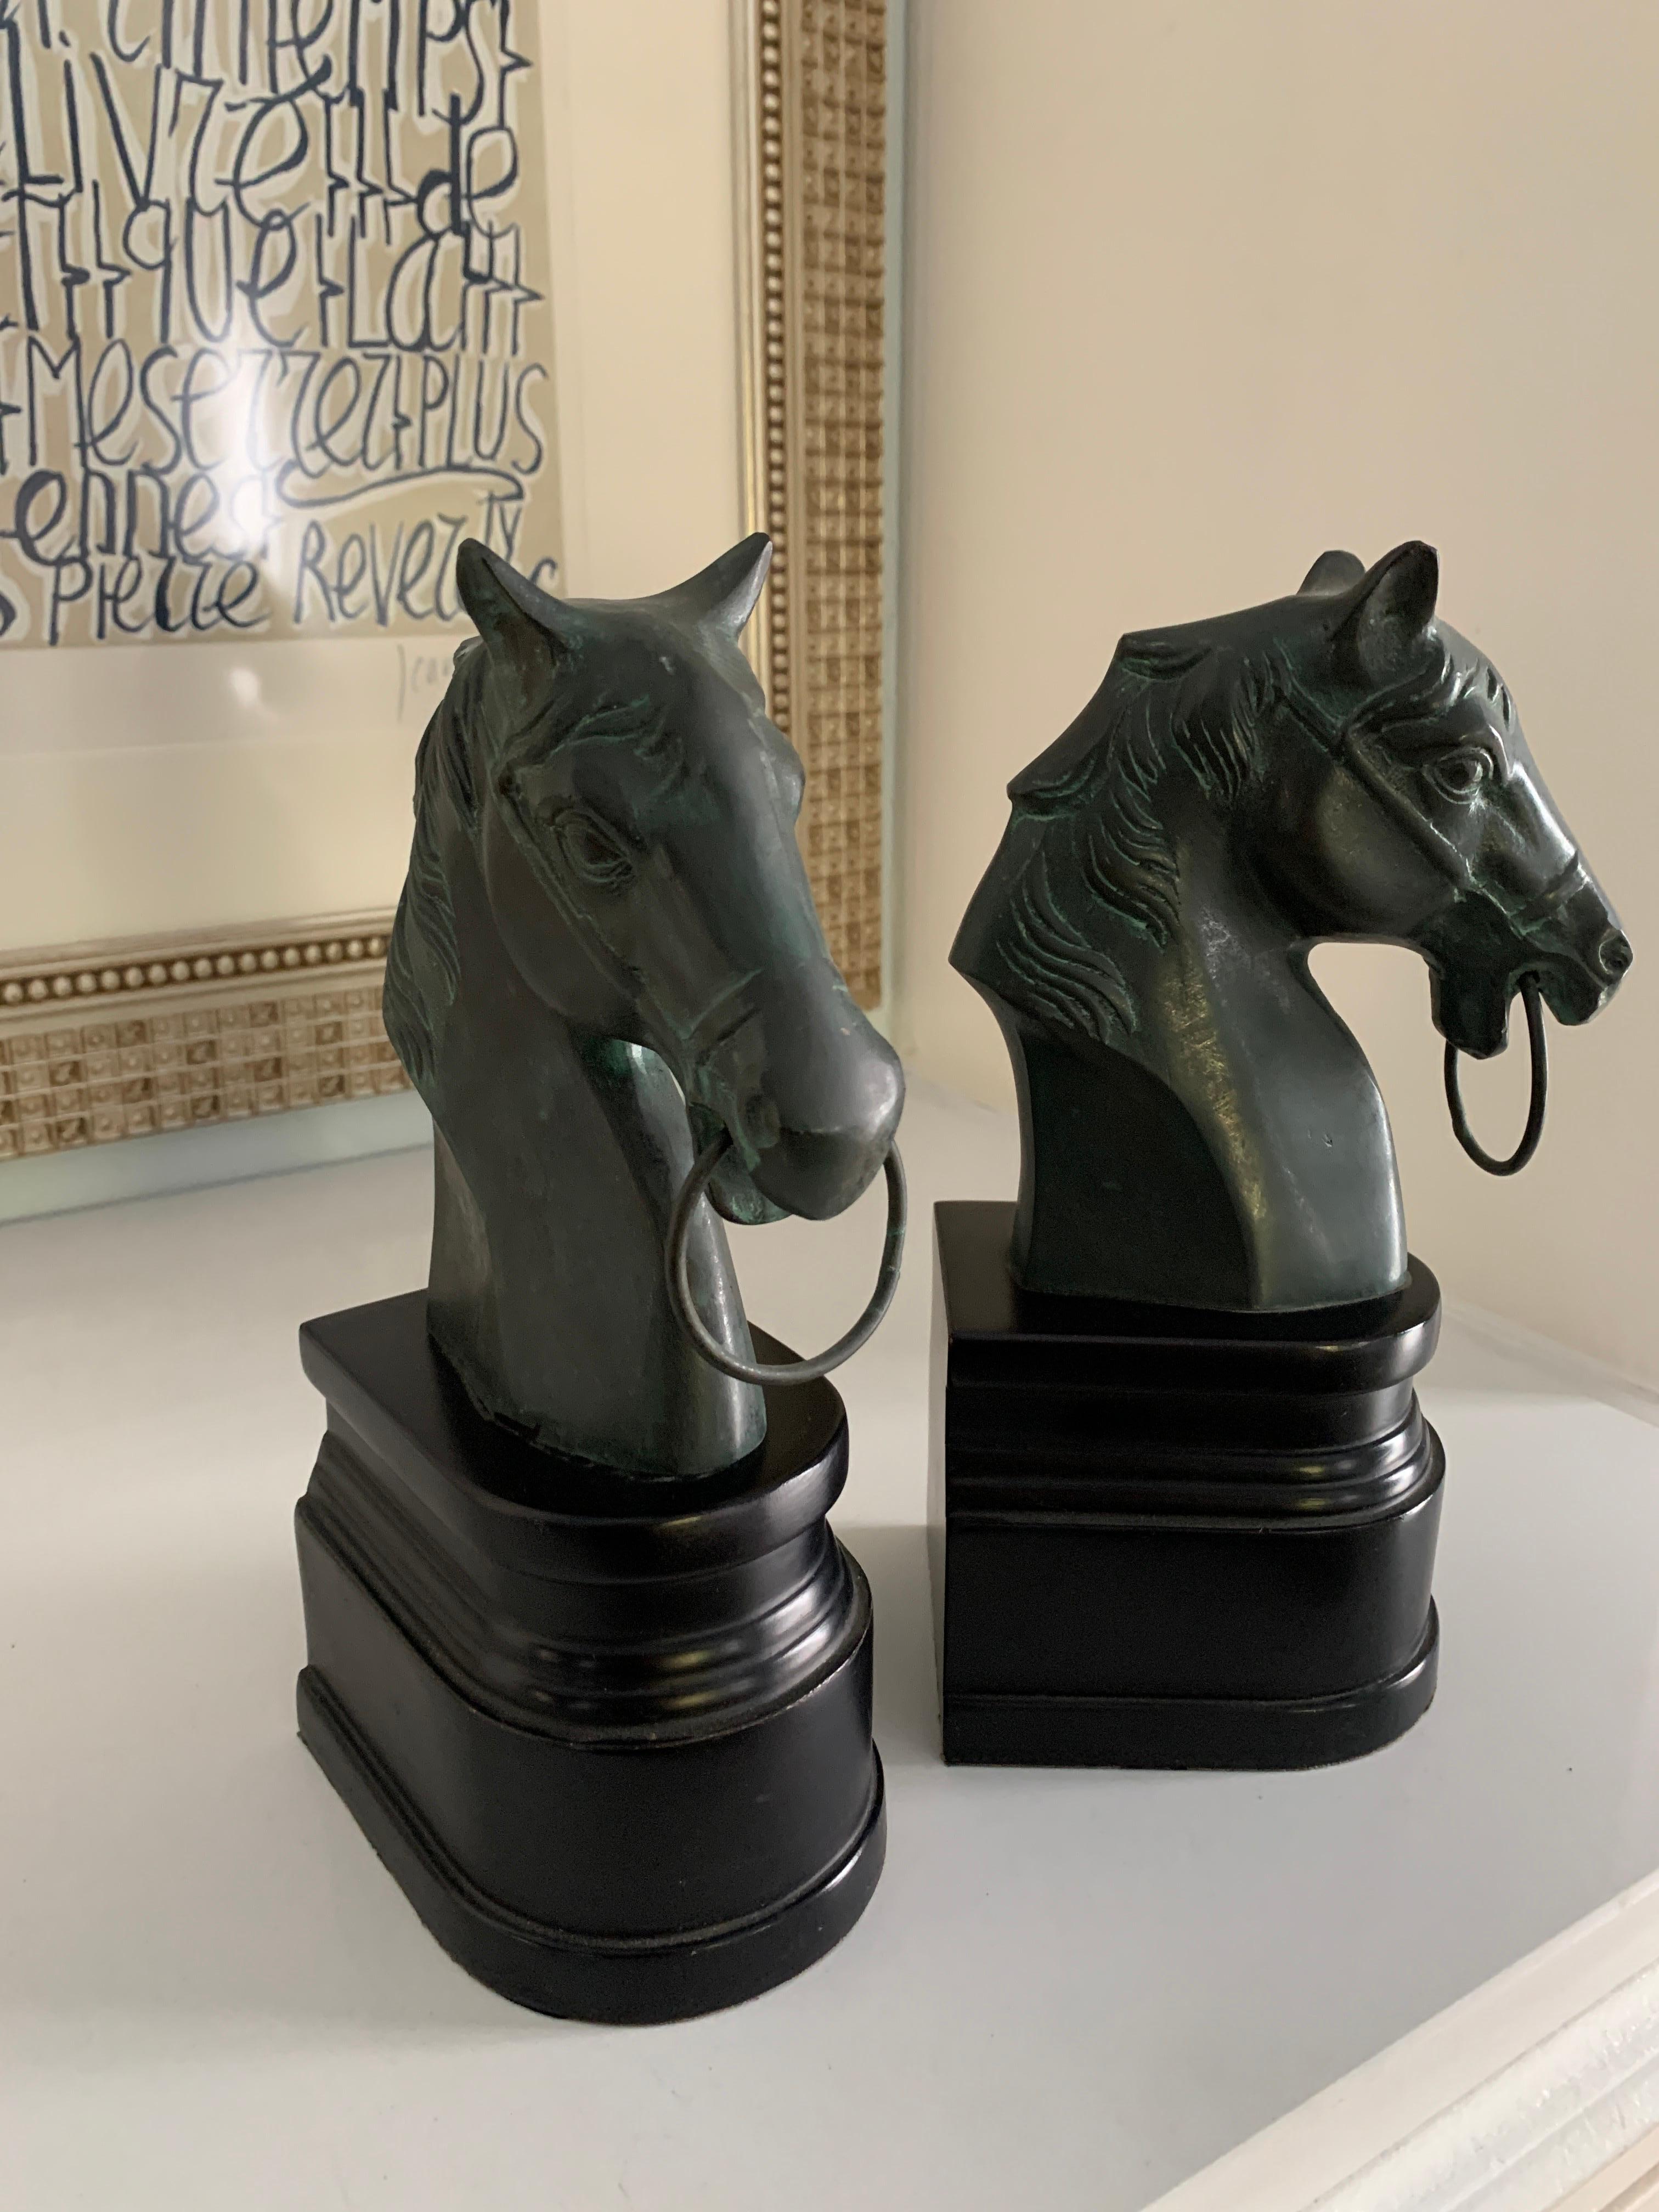 Pair of horse head bookends on stand - The wonderful pair have a patinated bronze top with a ring through the horse nose and black bases. A handsome pair, perfectly suited for the office, den or equestrian aficionado. The pair are reminiscent of